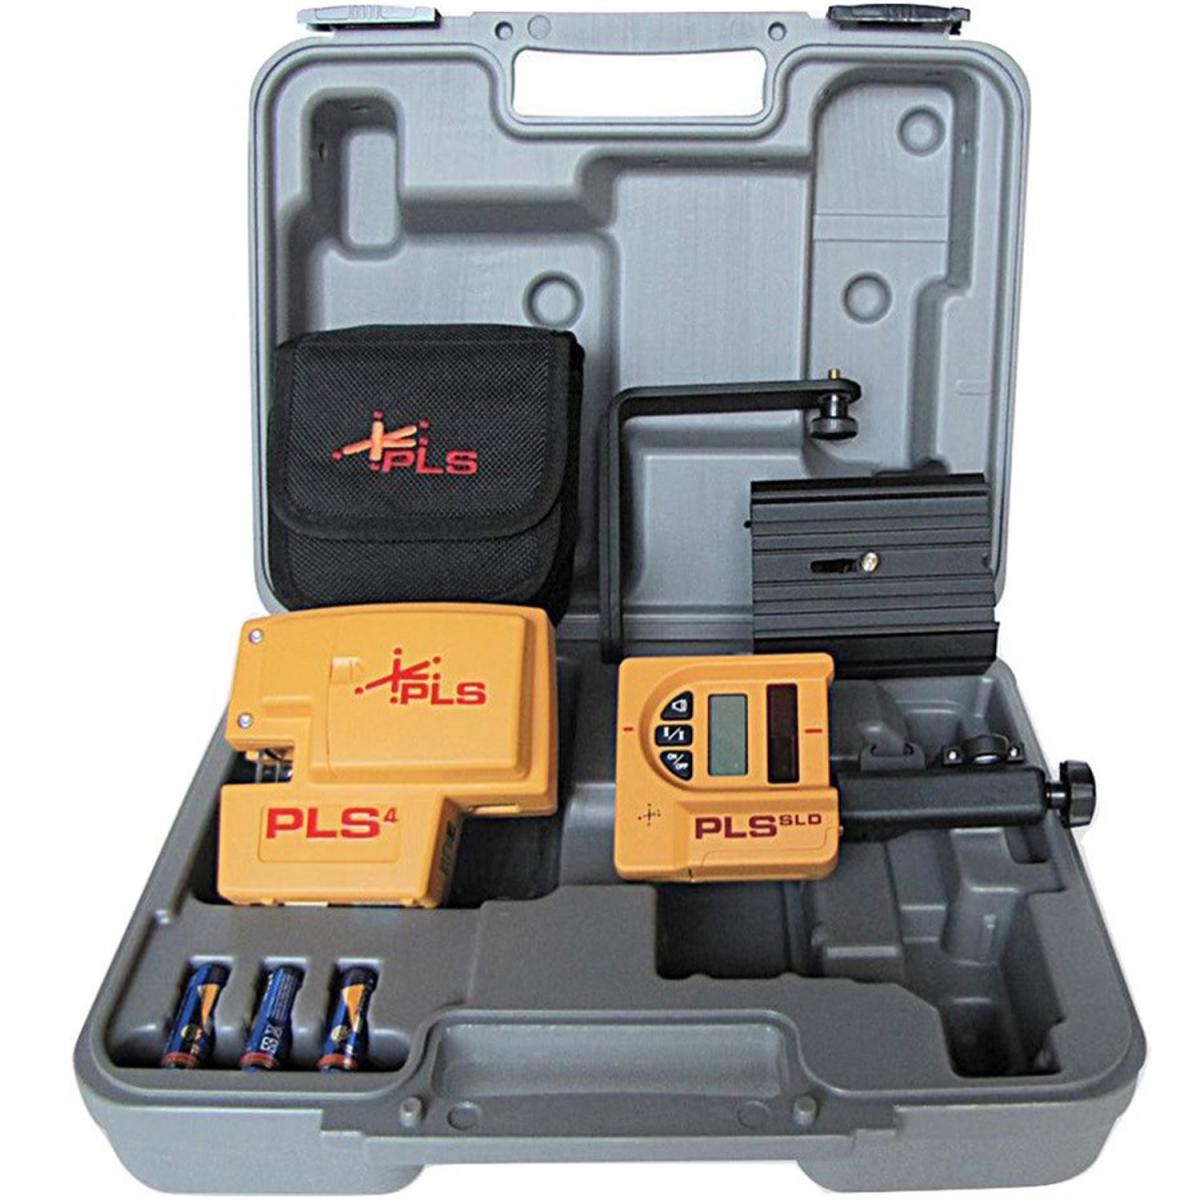 Pacific Laser Systems PLS4 Tool Point and Line Laser Grade C No Battery Door 